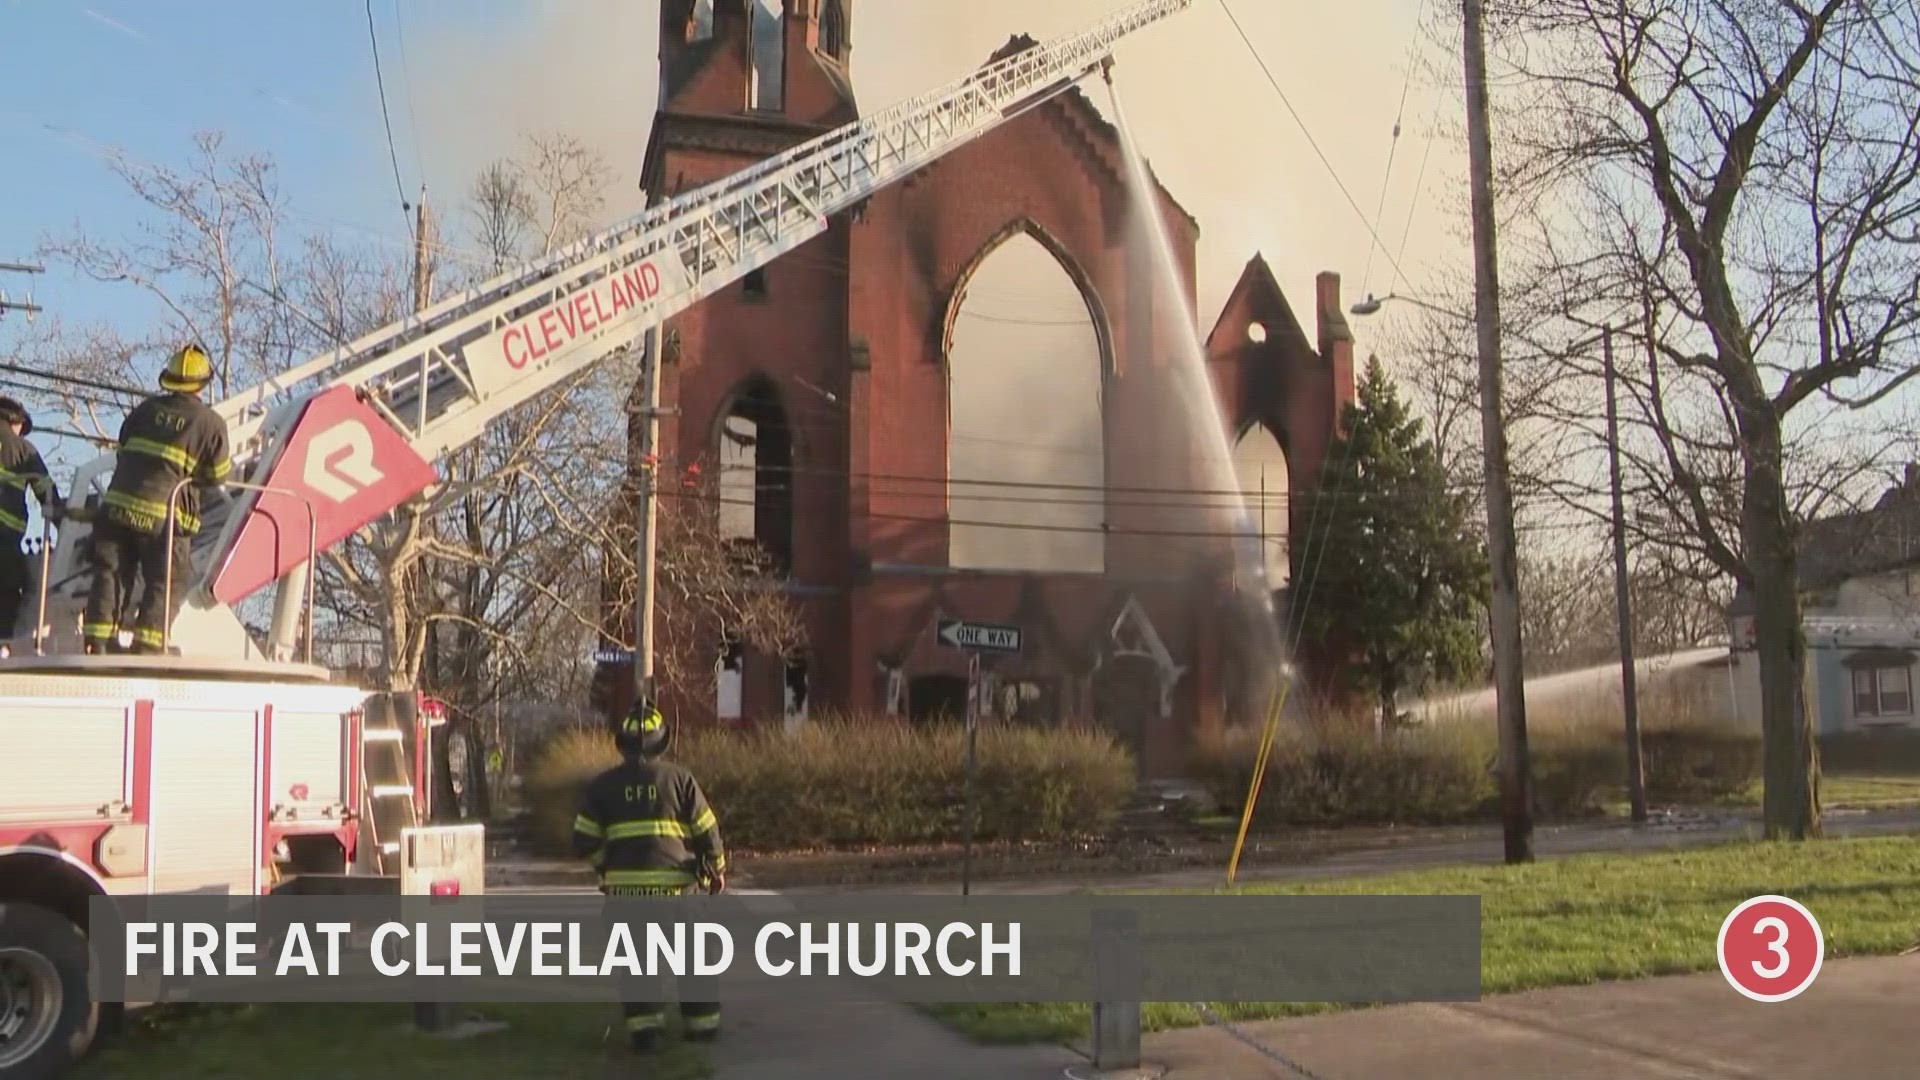 Crews were on scene after a fire at a Cleveland church on Thursday morning.